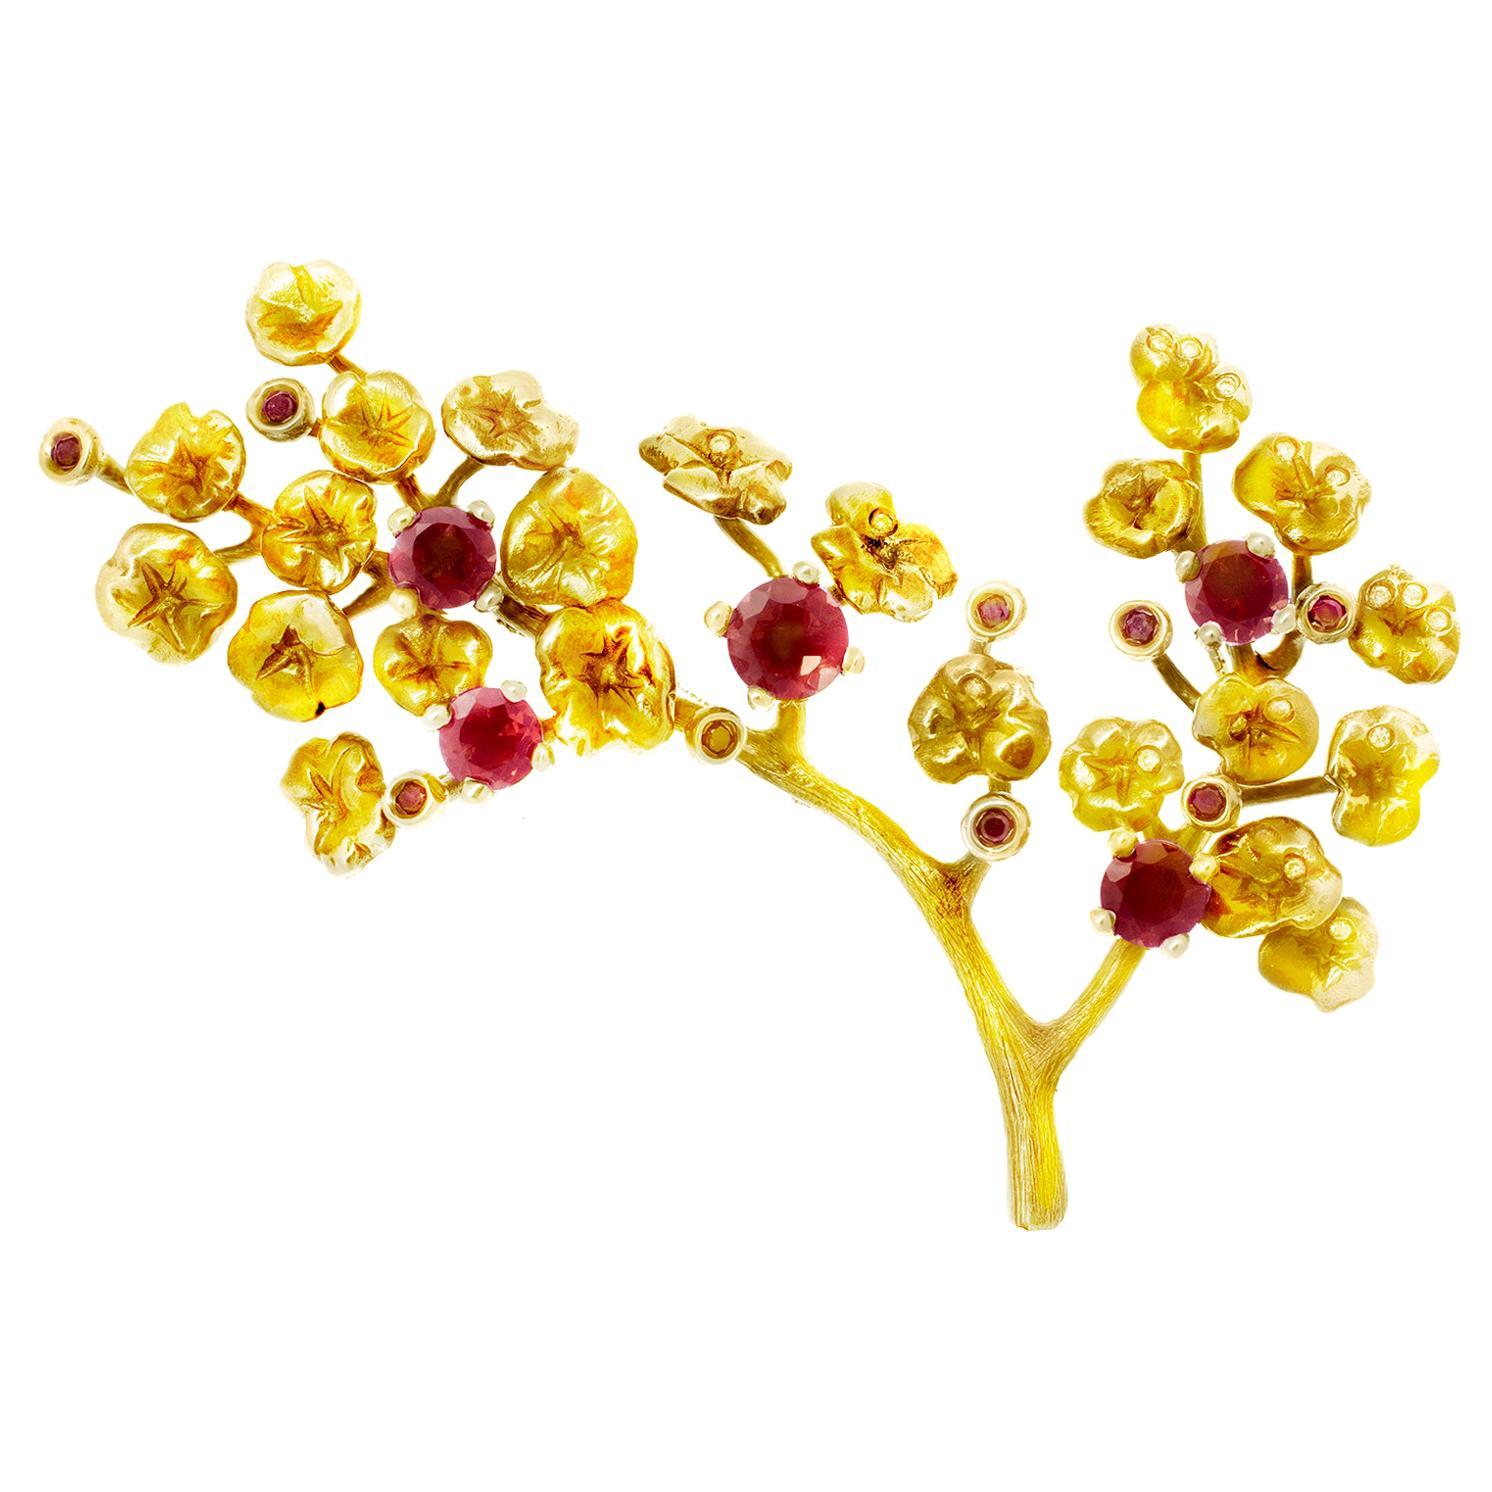 Yellow Gold Heliotrope Contemporary Brooch with Pink Red Rubies and Diamonds